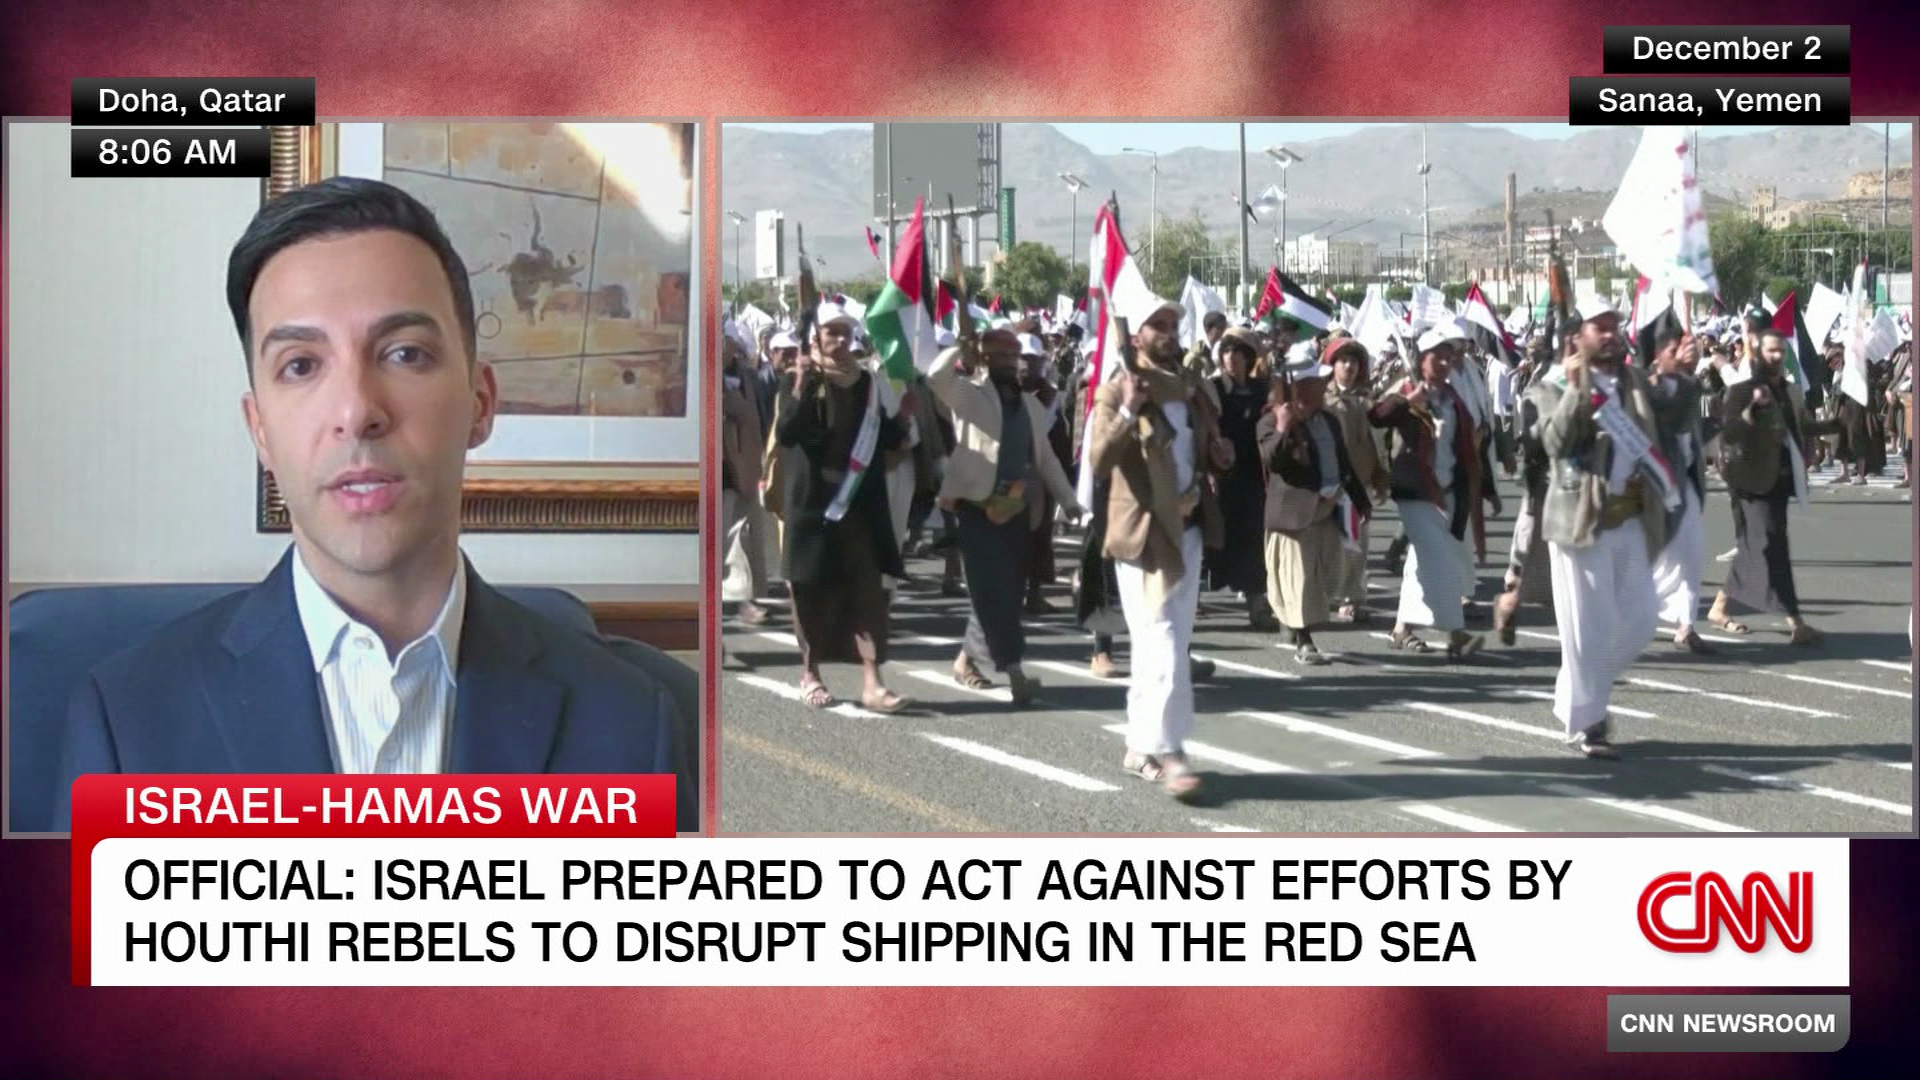 Israel says "ready" to take action if others don't curb Houthi rebel attacks  on shipping | CNN